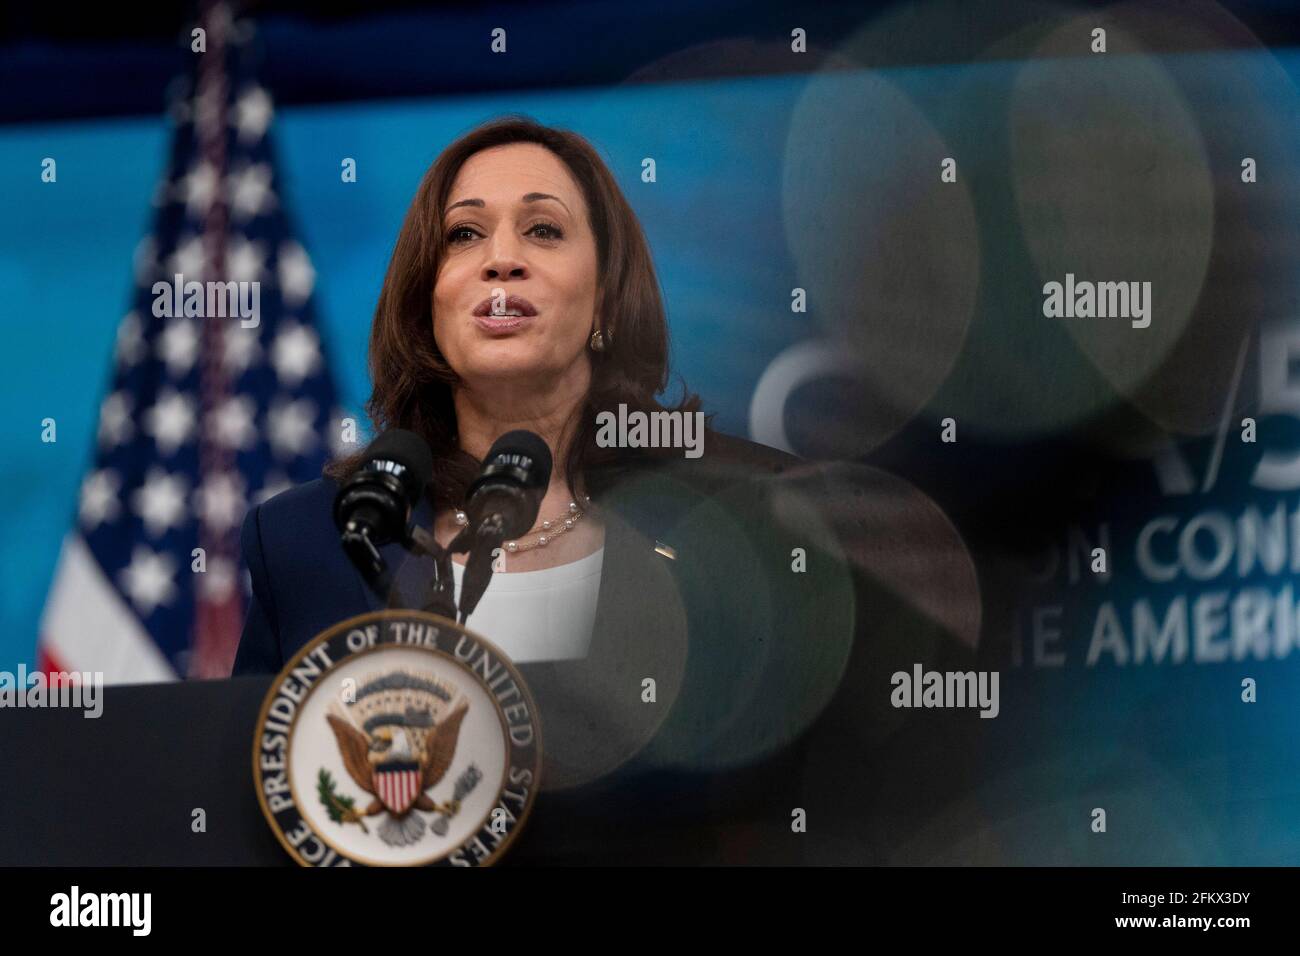 Washington, United States Of America. 04th May, 2021. Vice President Kamala Harris delivers remarks during the 51st Annual Washington Conference on the Americas in the South Court Auditorium on Tuesday, May 4, 2021 in Washington, DC The conference features remarks by senior U.S. government officials and leaders, offering an early opportunity for participants to hear directly from the new Biden administration on its hemispheric policy agenda. Credit: Leigh Vogel/Pool/Sipa USA Credit: Sipa USA/Alamy Live News Stock Photo